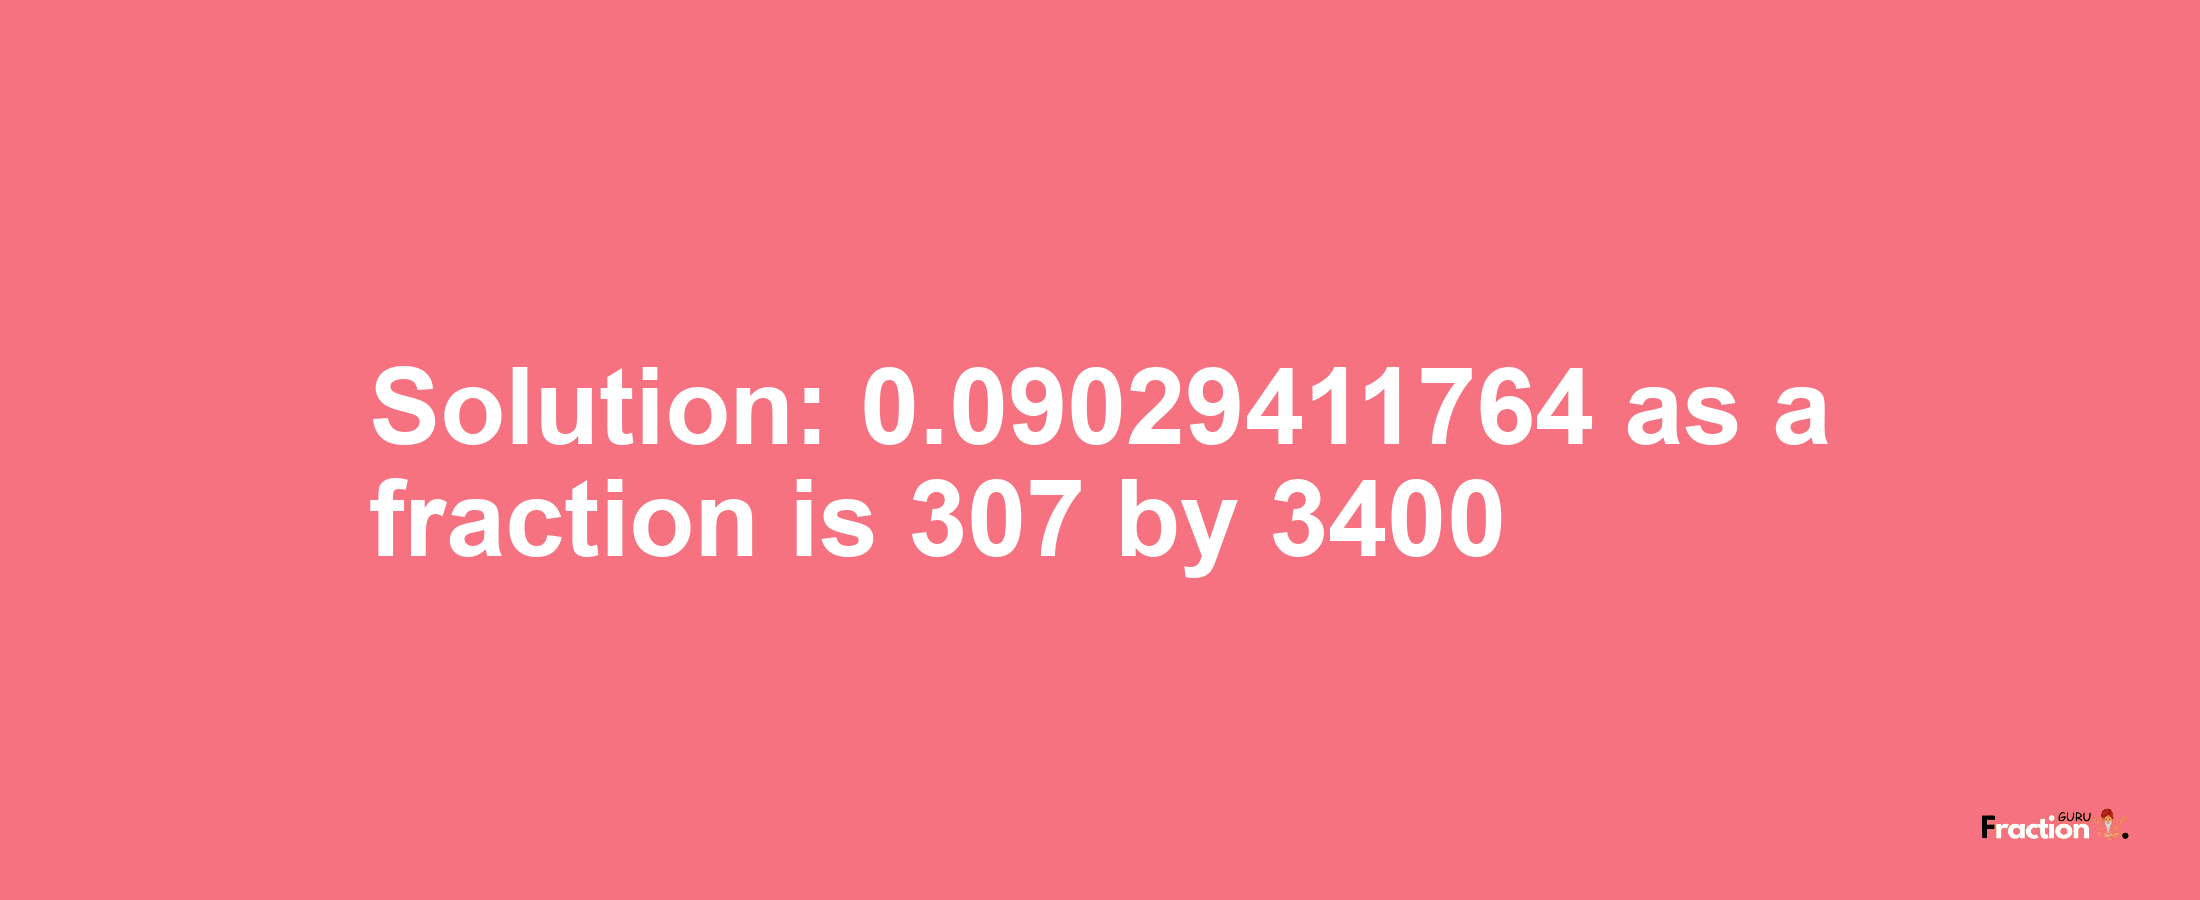 Solution:0.09029411764 as a fraction is 307/3400